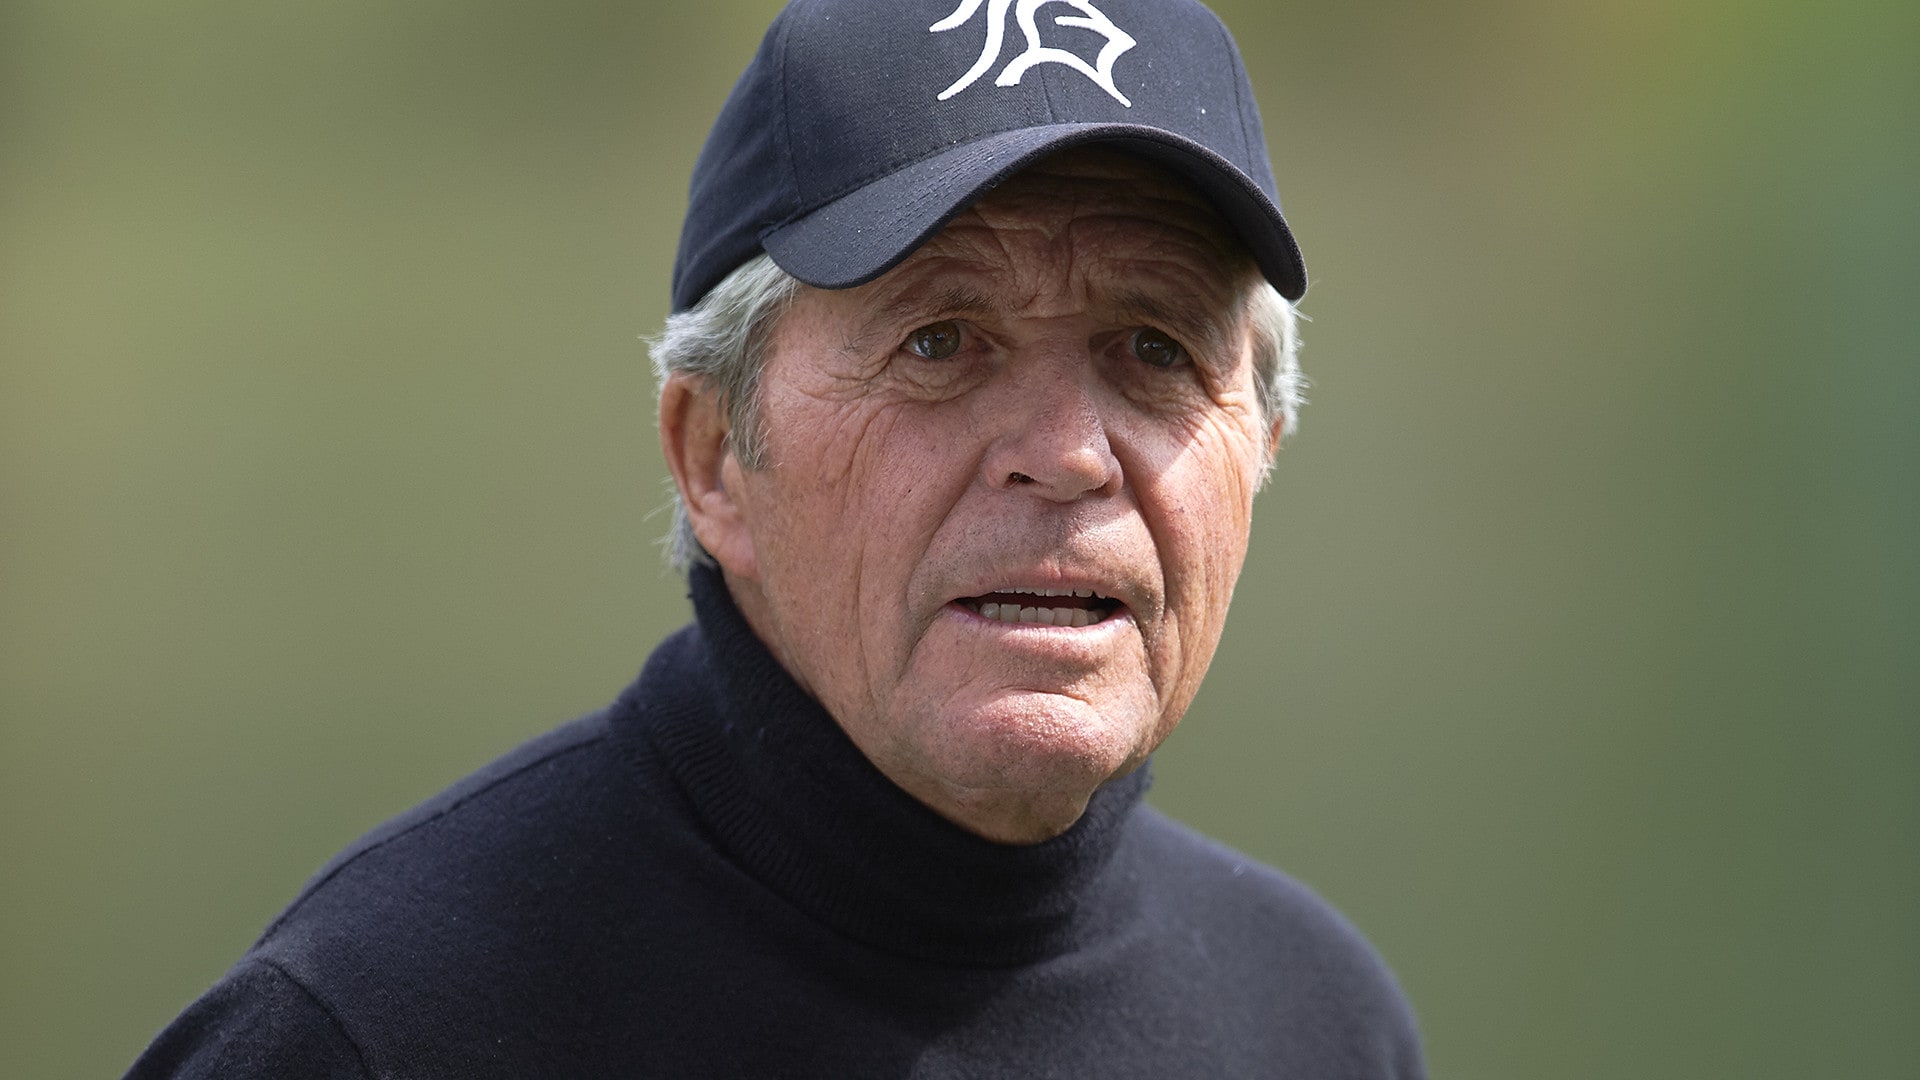 Gary Player gets $5 million in legal dispute with company operated by son